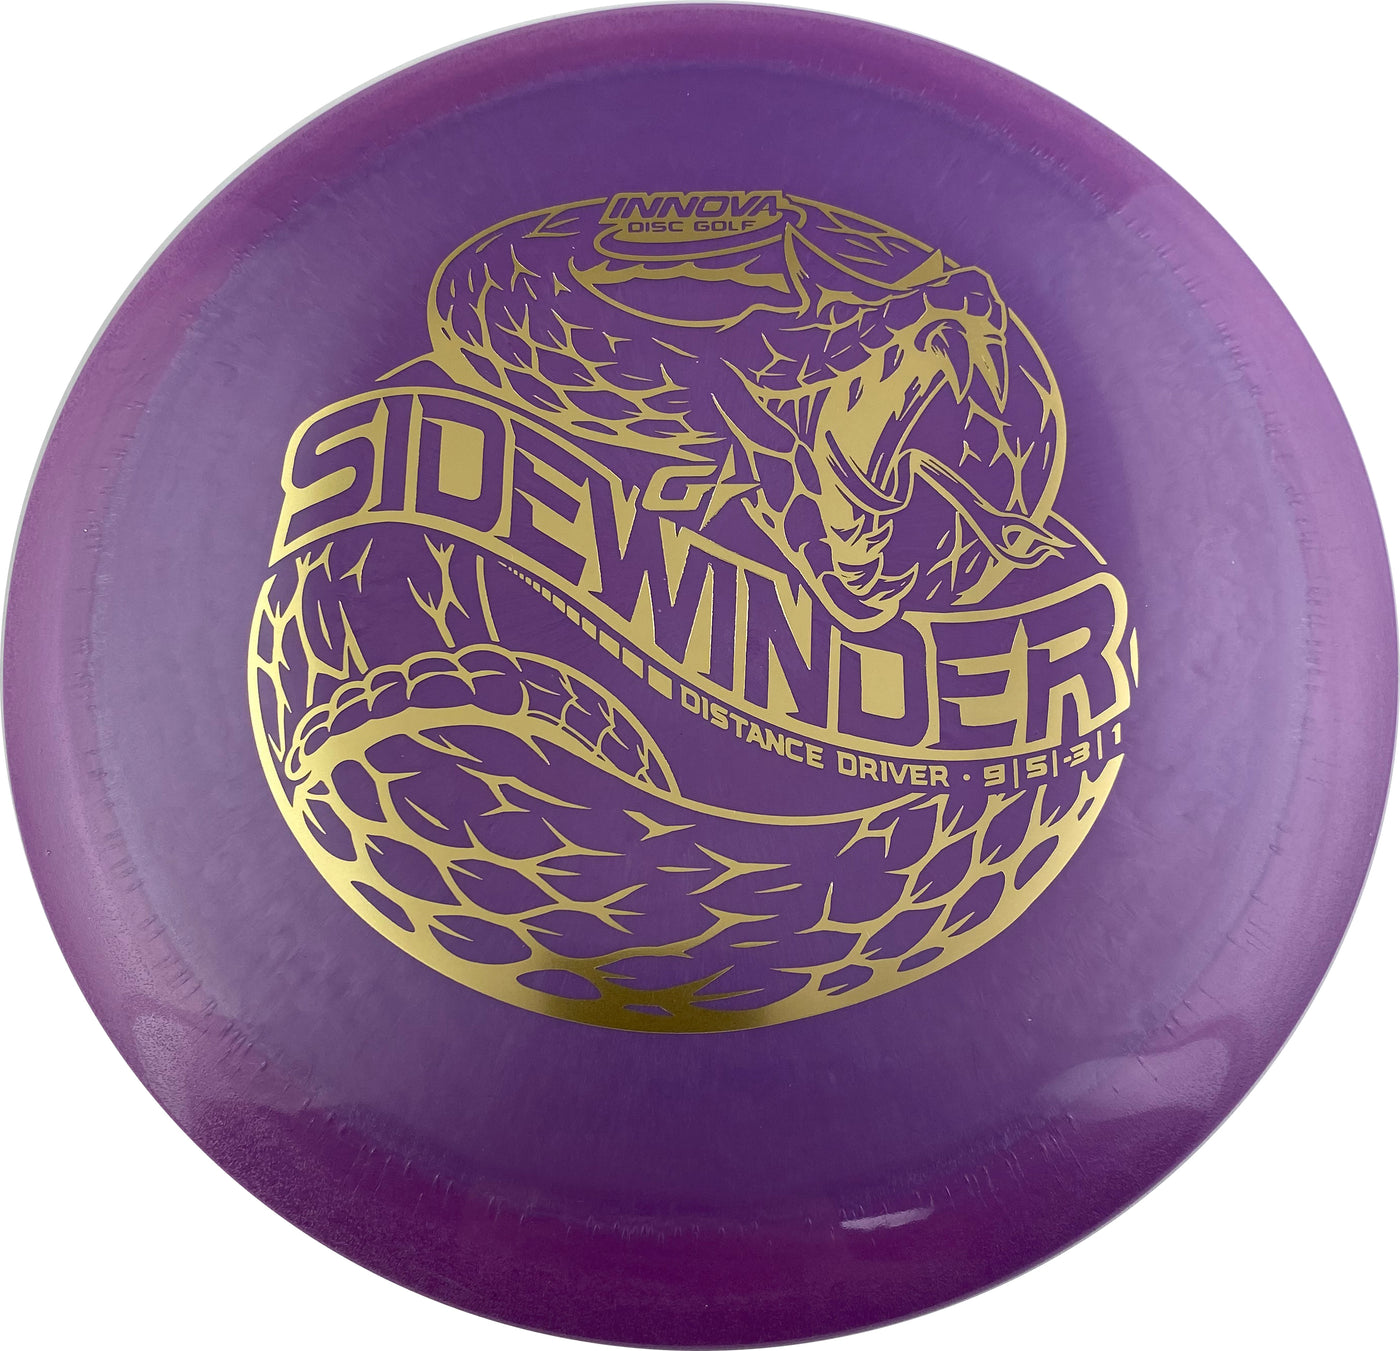 Innova Gstar Sidewinder Distance Driver with Stock Character Stamp - Speed 9